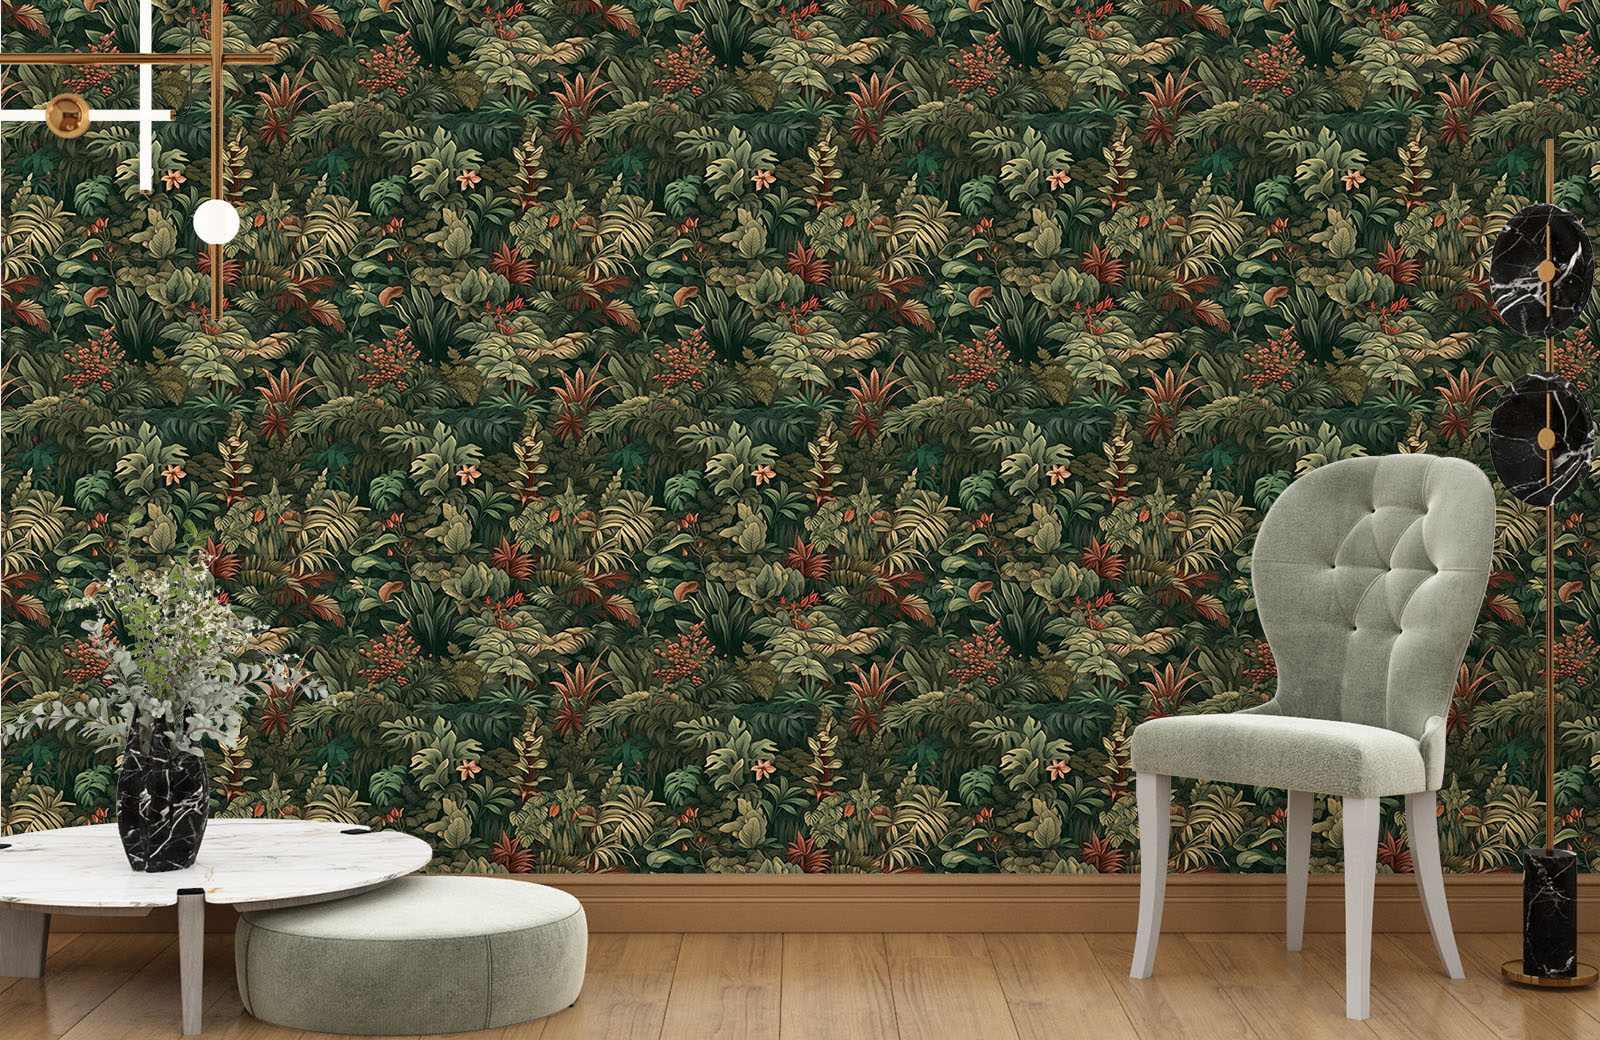 dense-tropical-plants-with-multi-coloured-leaves-wallpaper-with-chair